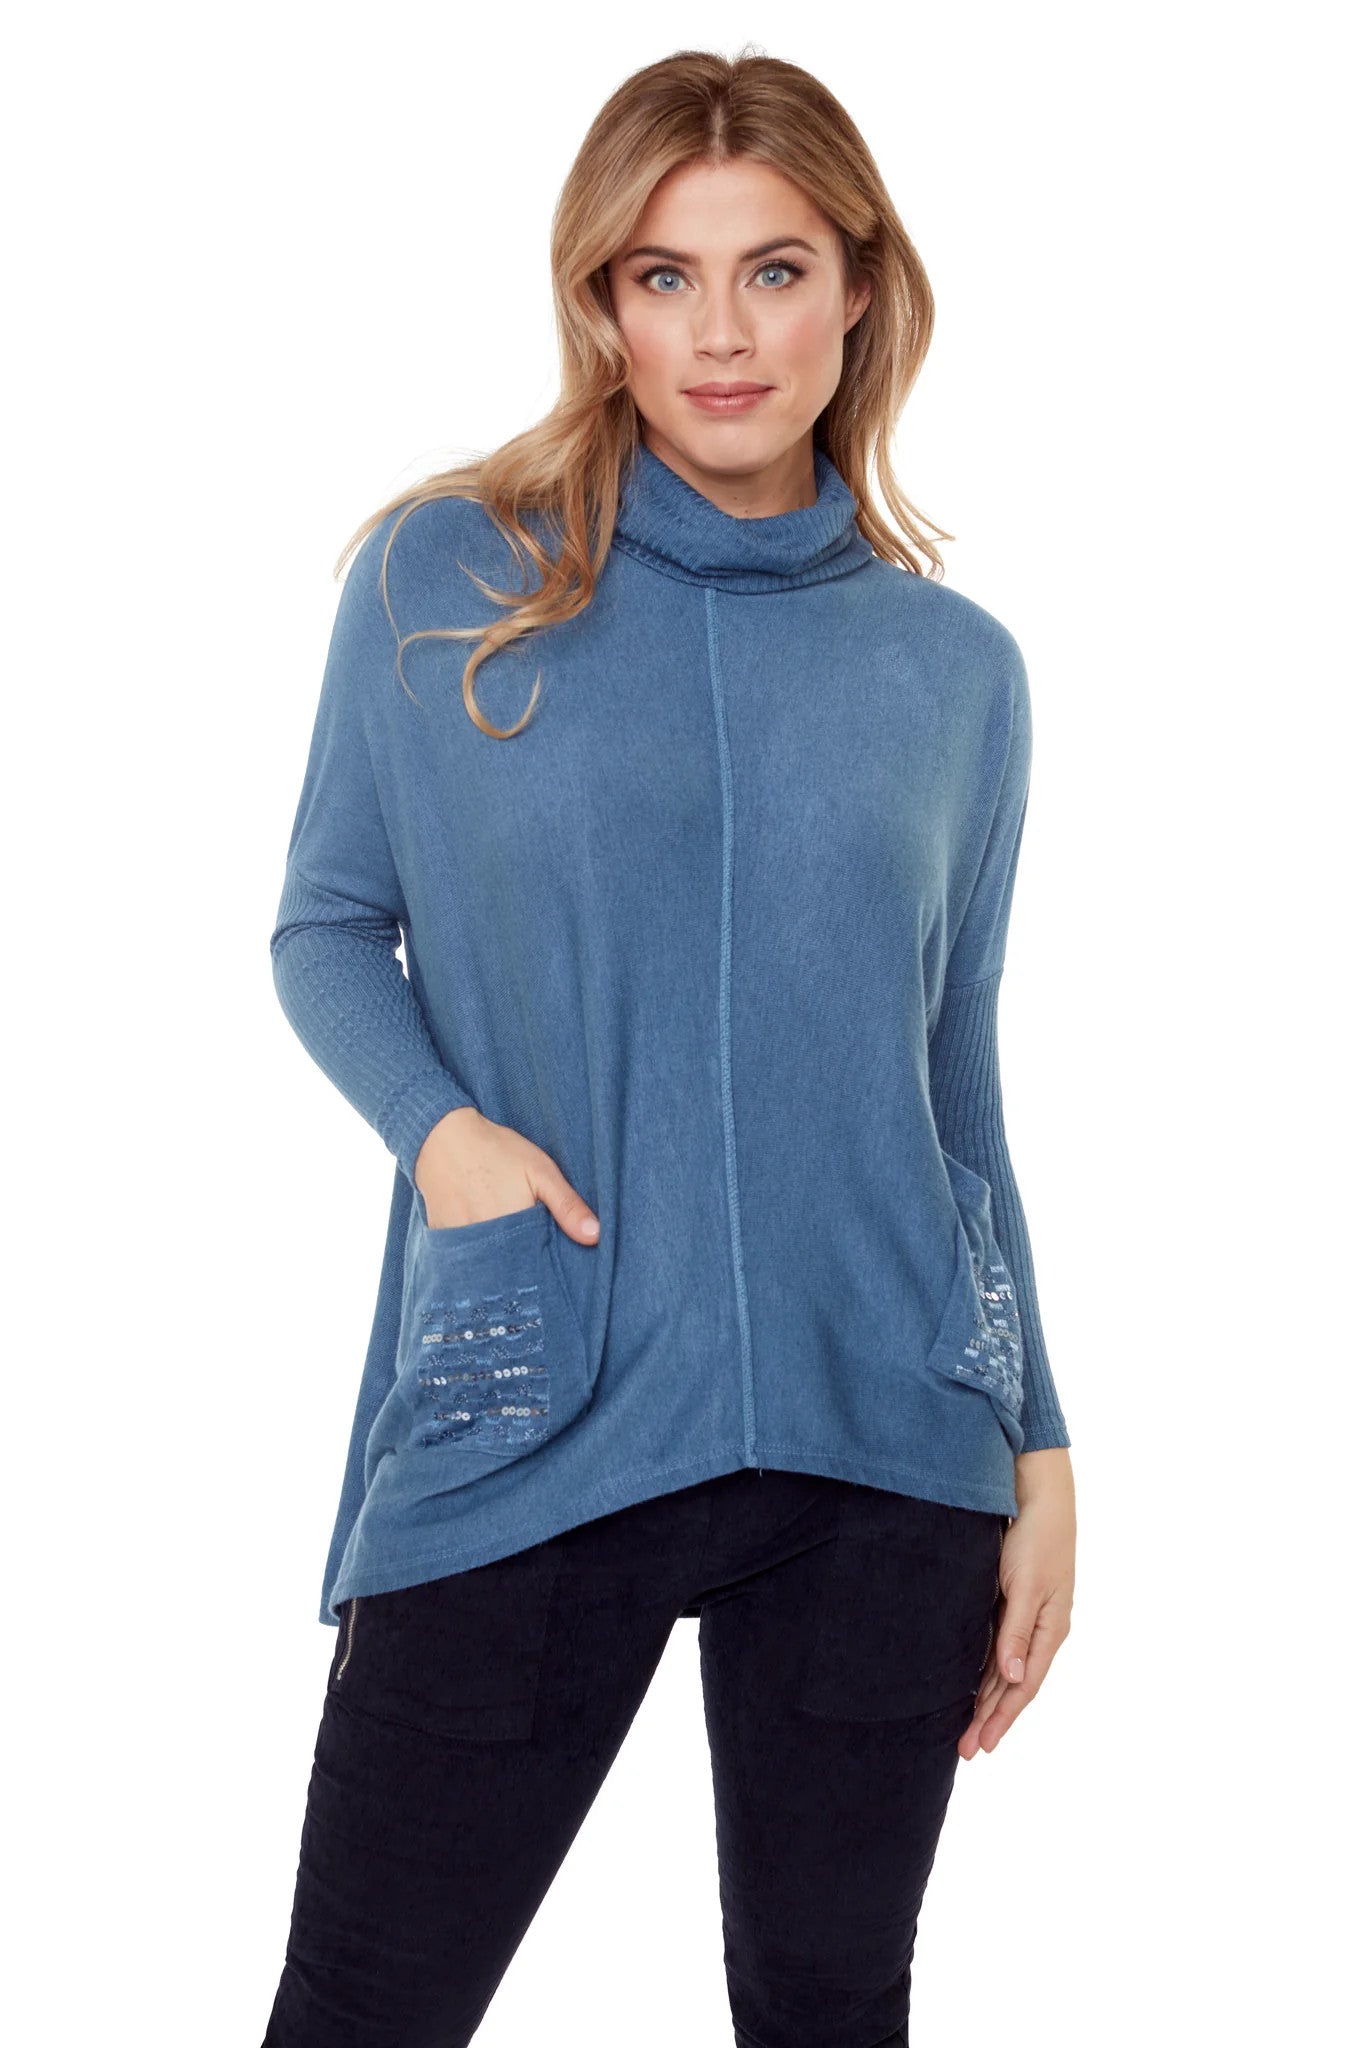 Sweater With Pockets 6612